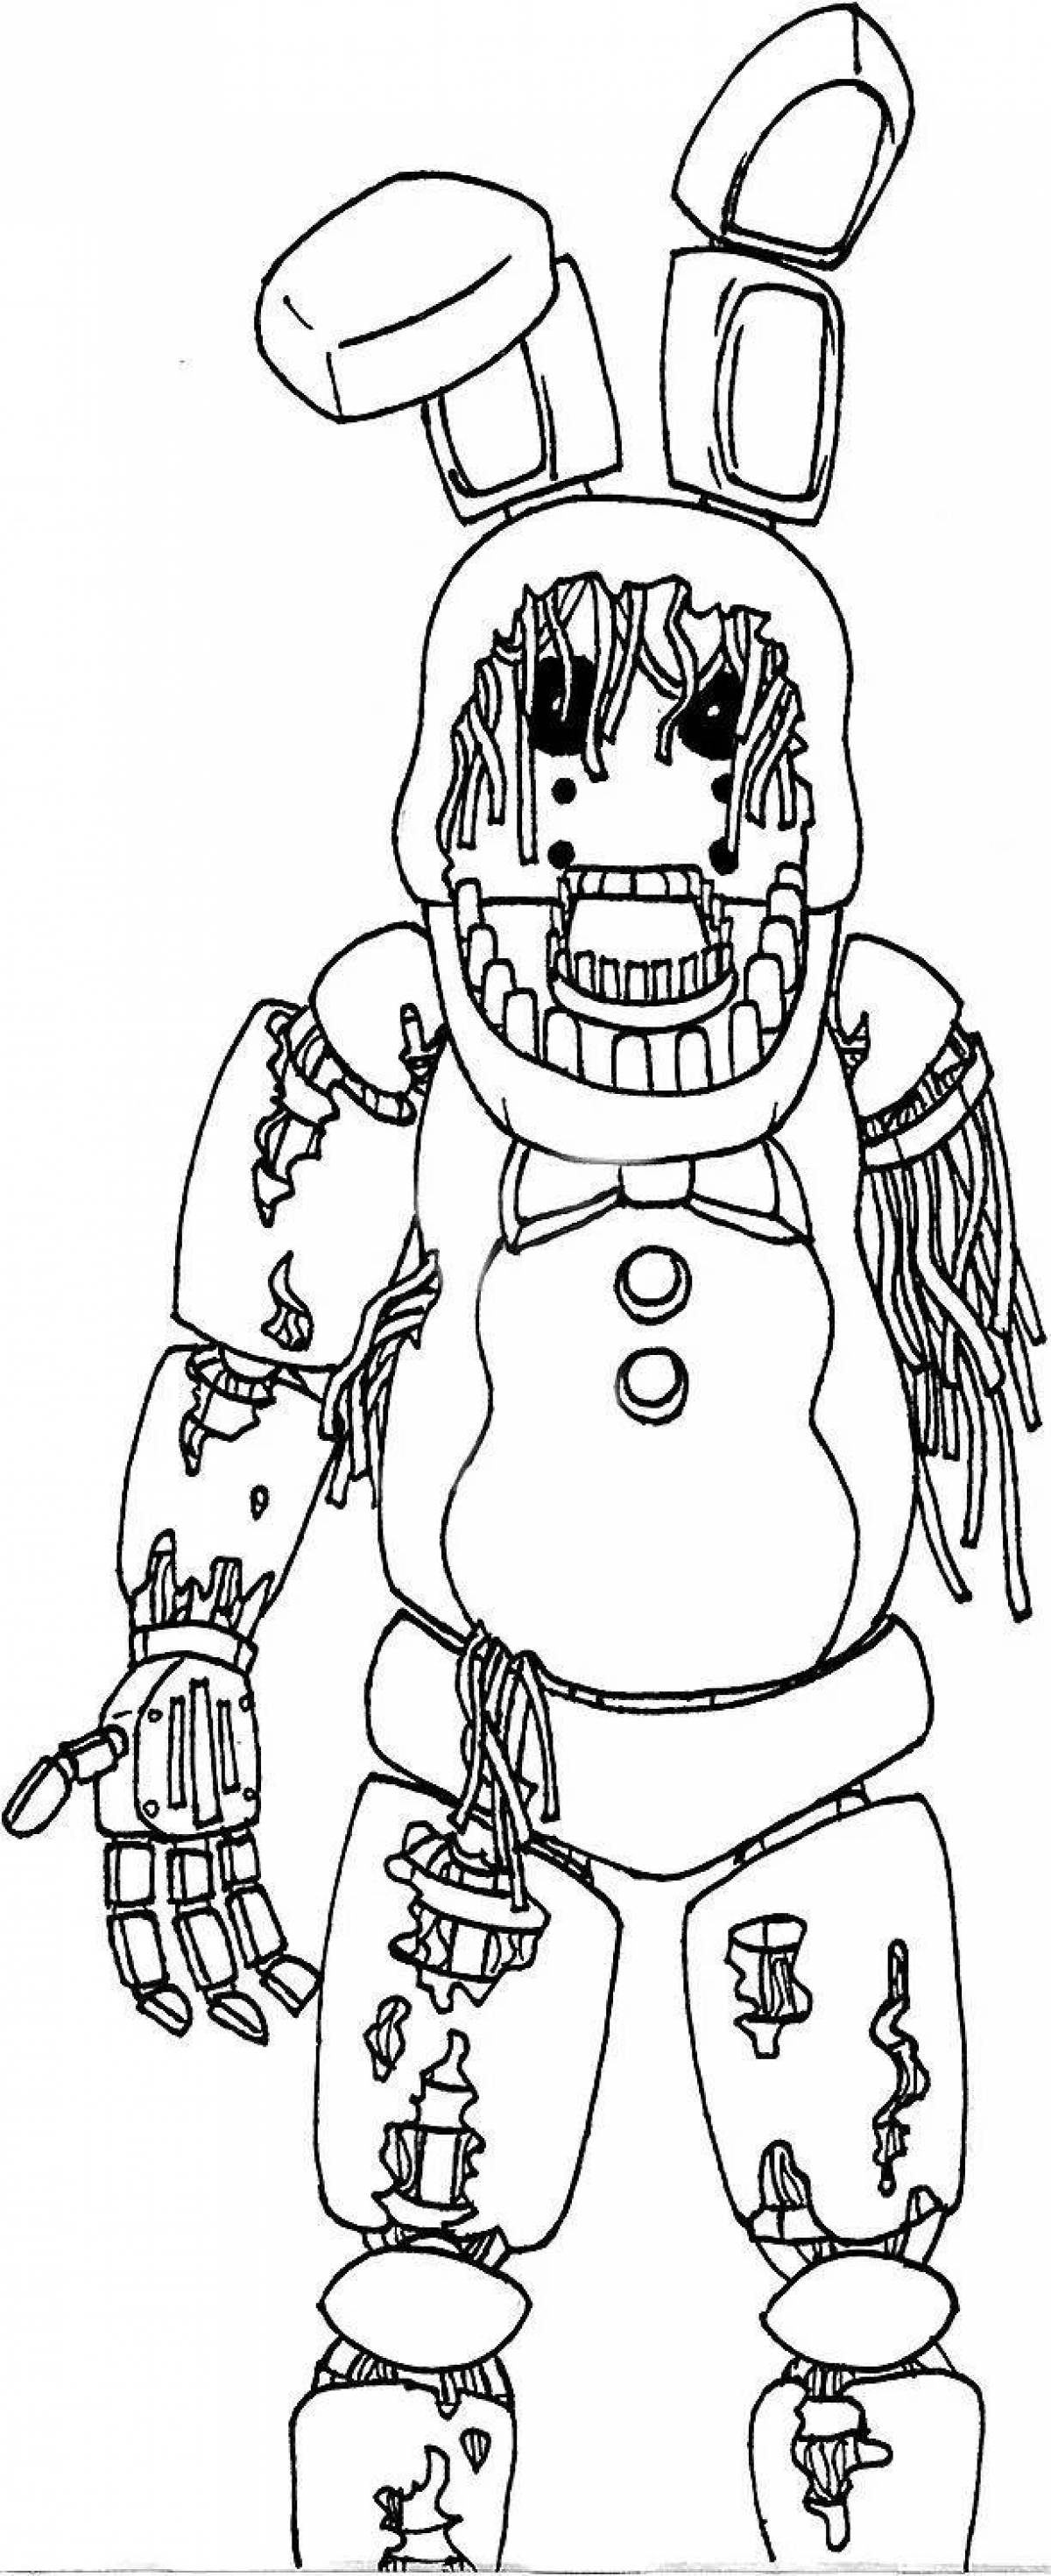 Gorgeous old freddy coloring book